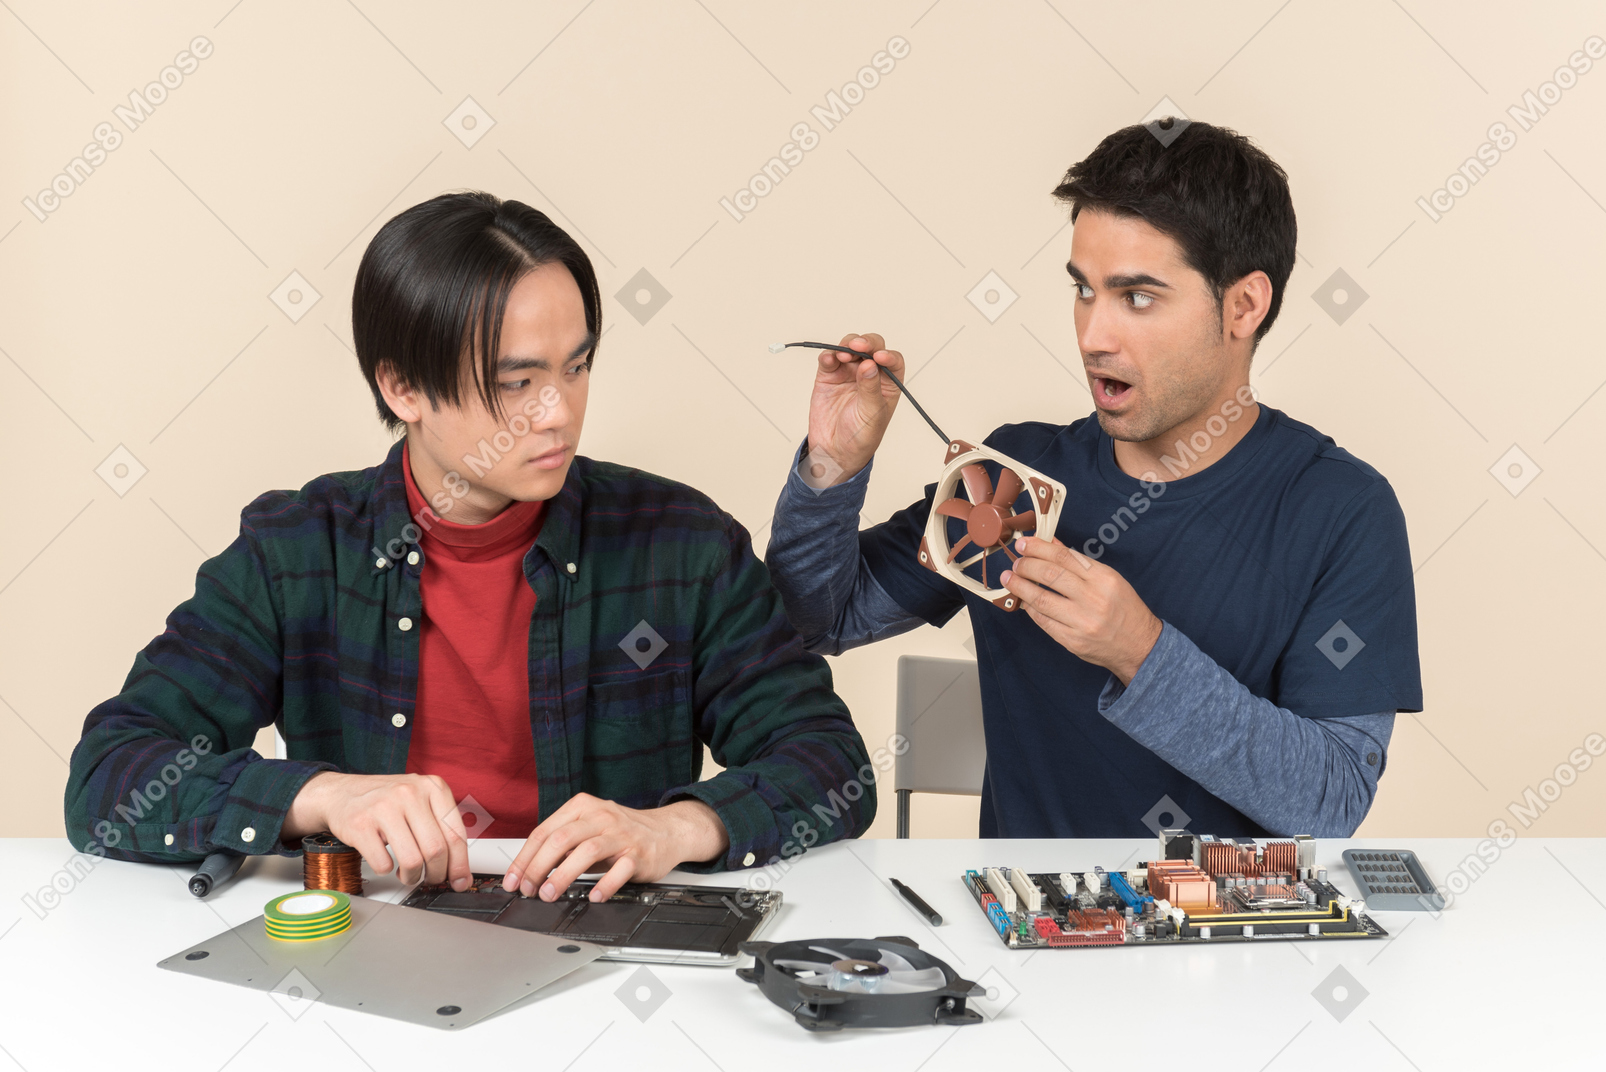 Two young geeks sitting at the table with details on it and one of them looking surprised